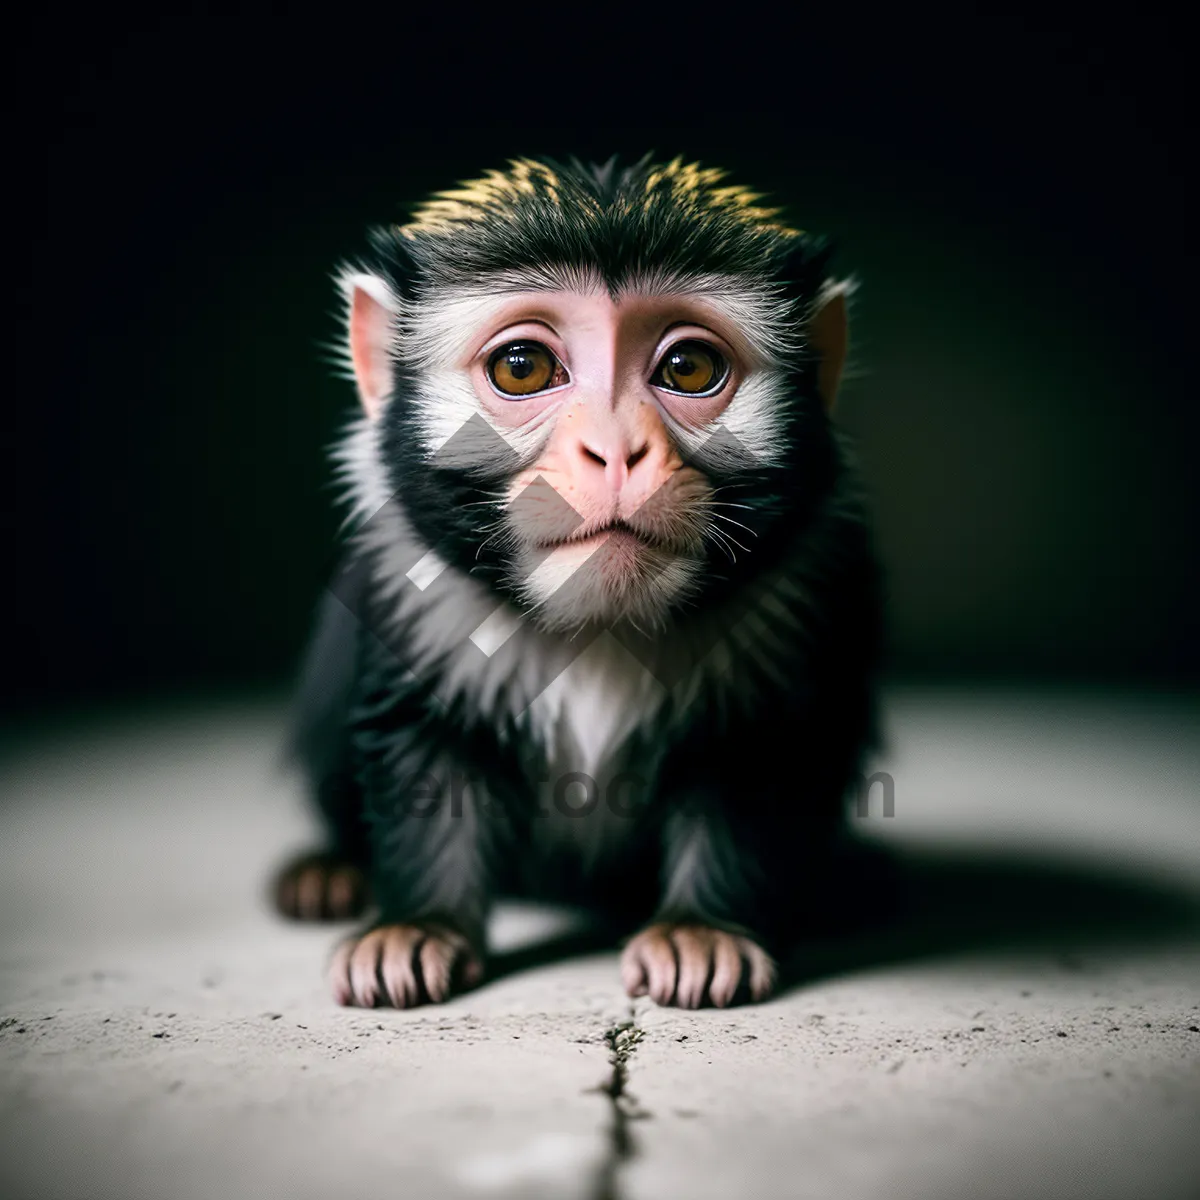 Picture of Adorable Primate Kitty with Furry Whiskers